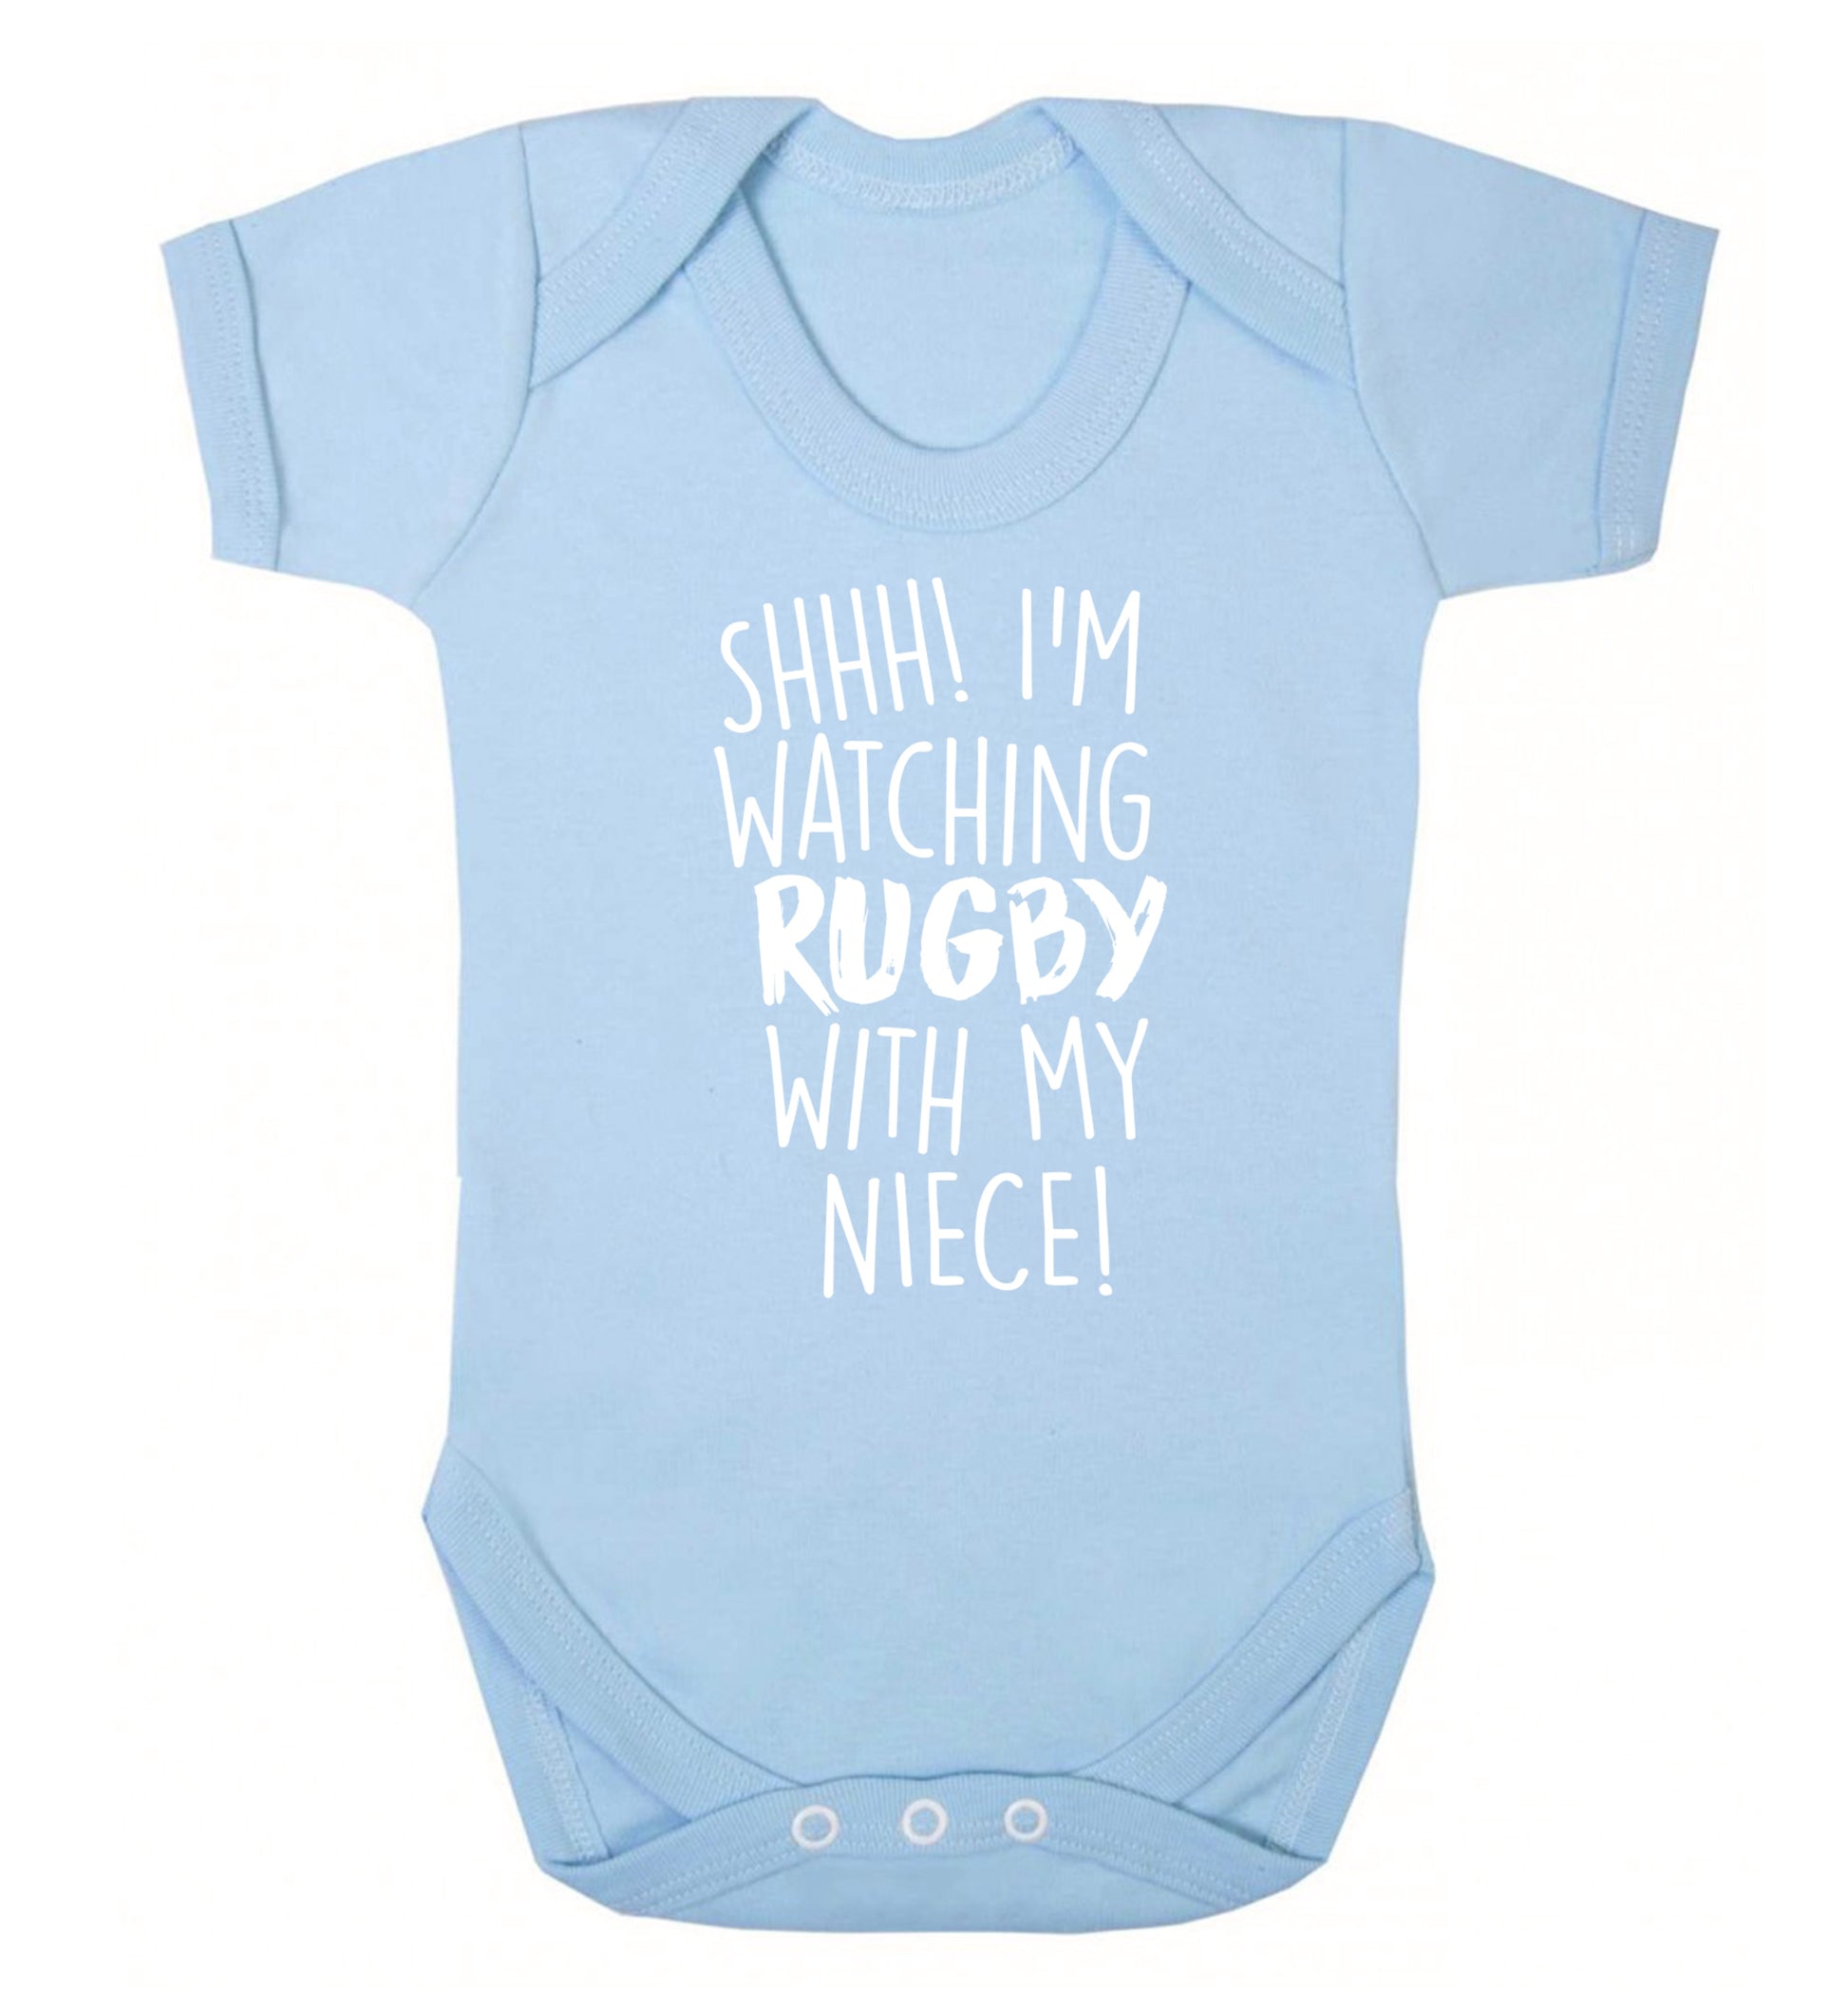 Shh.. I'm watching rugby with my niece Baby Vest pale blue 18-24 months